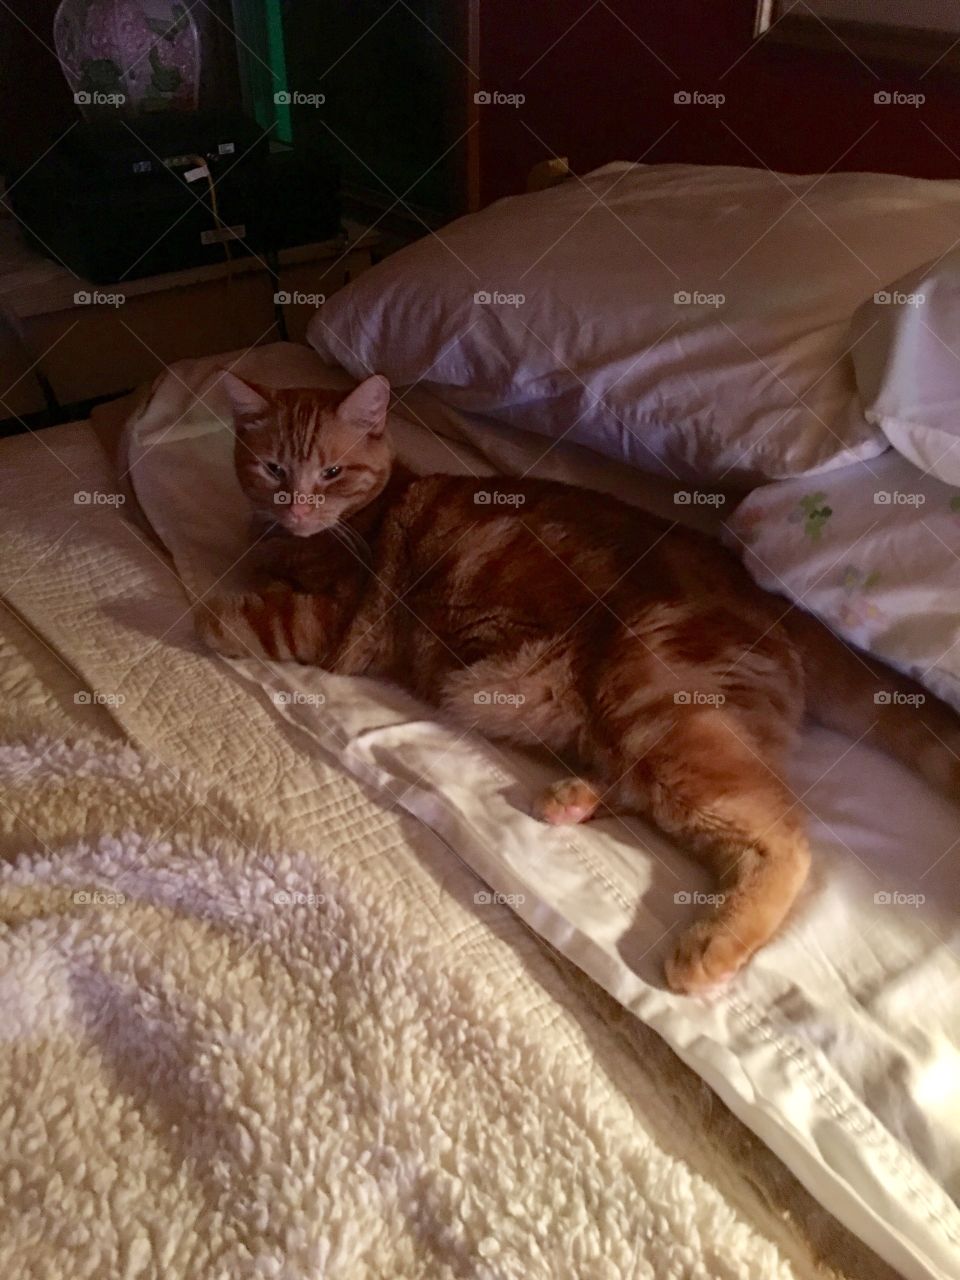 Moms cat opie on the bed. 